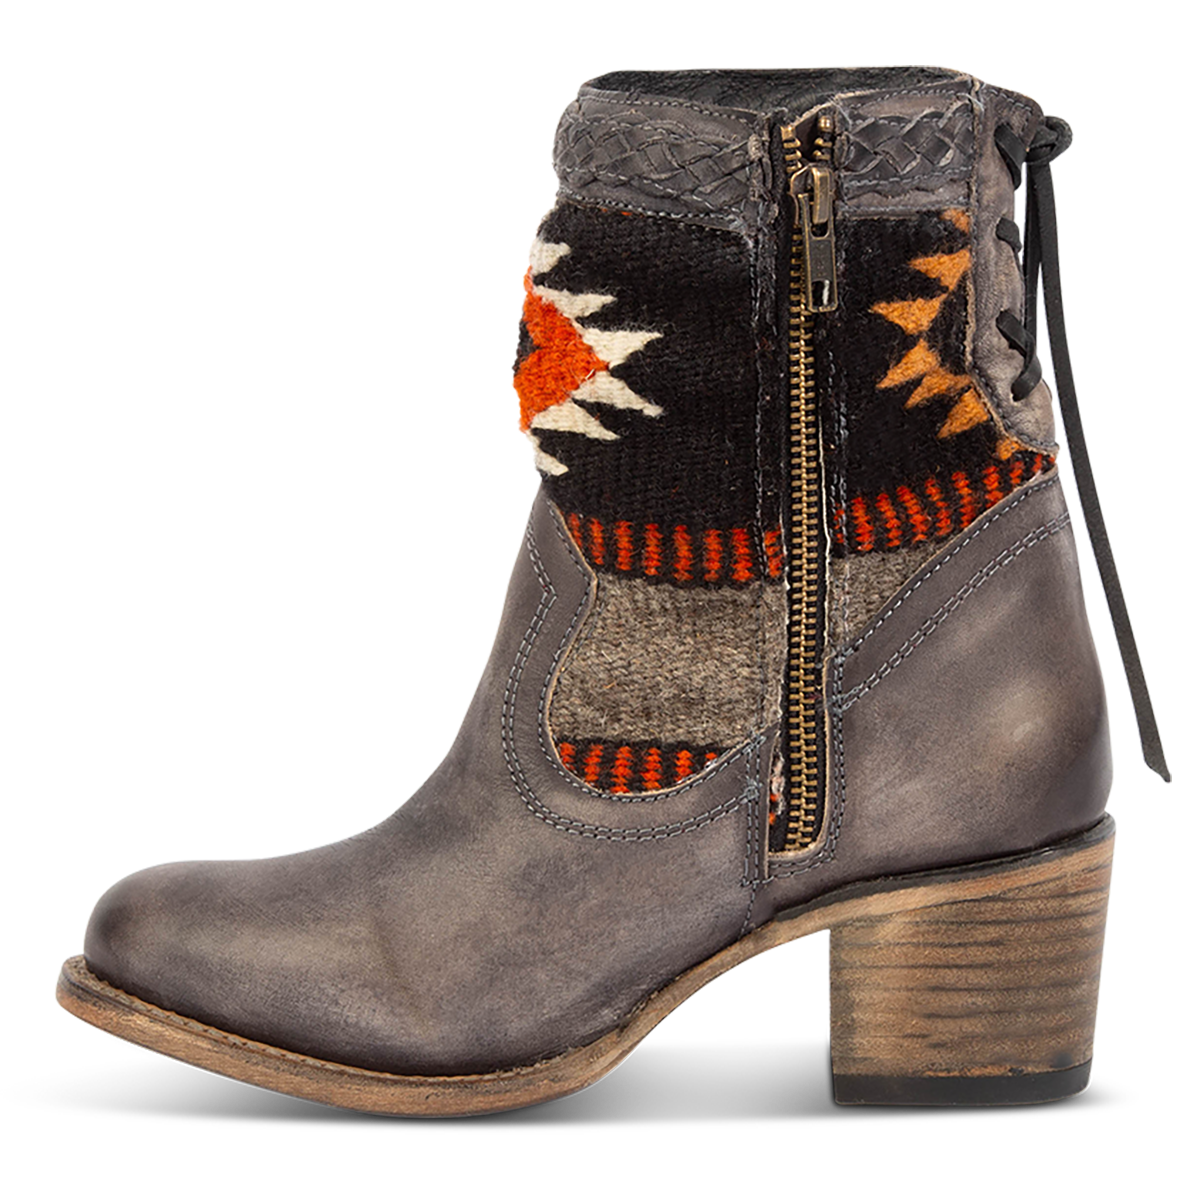 Inside view showing an inside working brass zipper, adjustable leather lacing and multi-colored woven detailing on FREEBIRD women's Songbird stone leather bootie